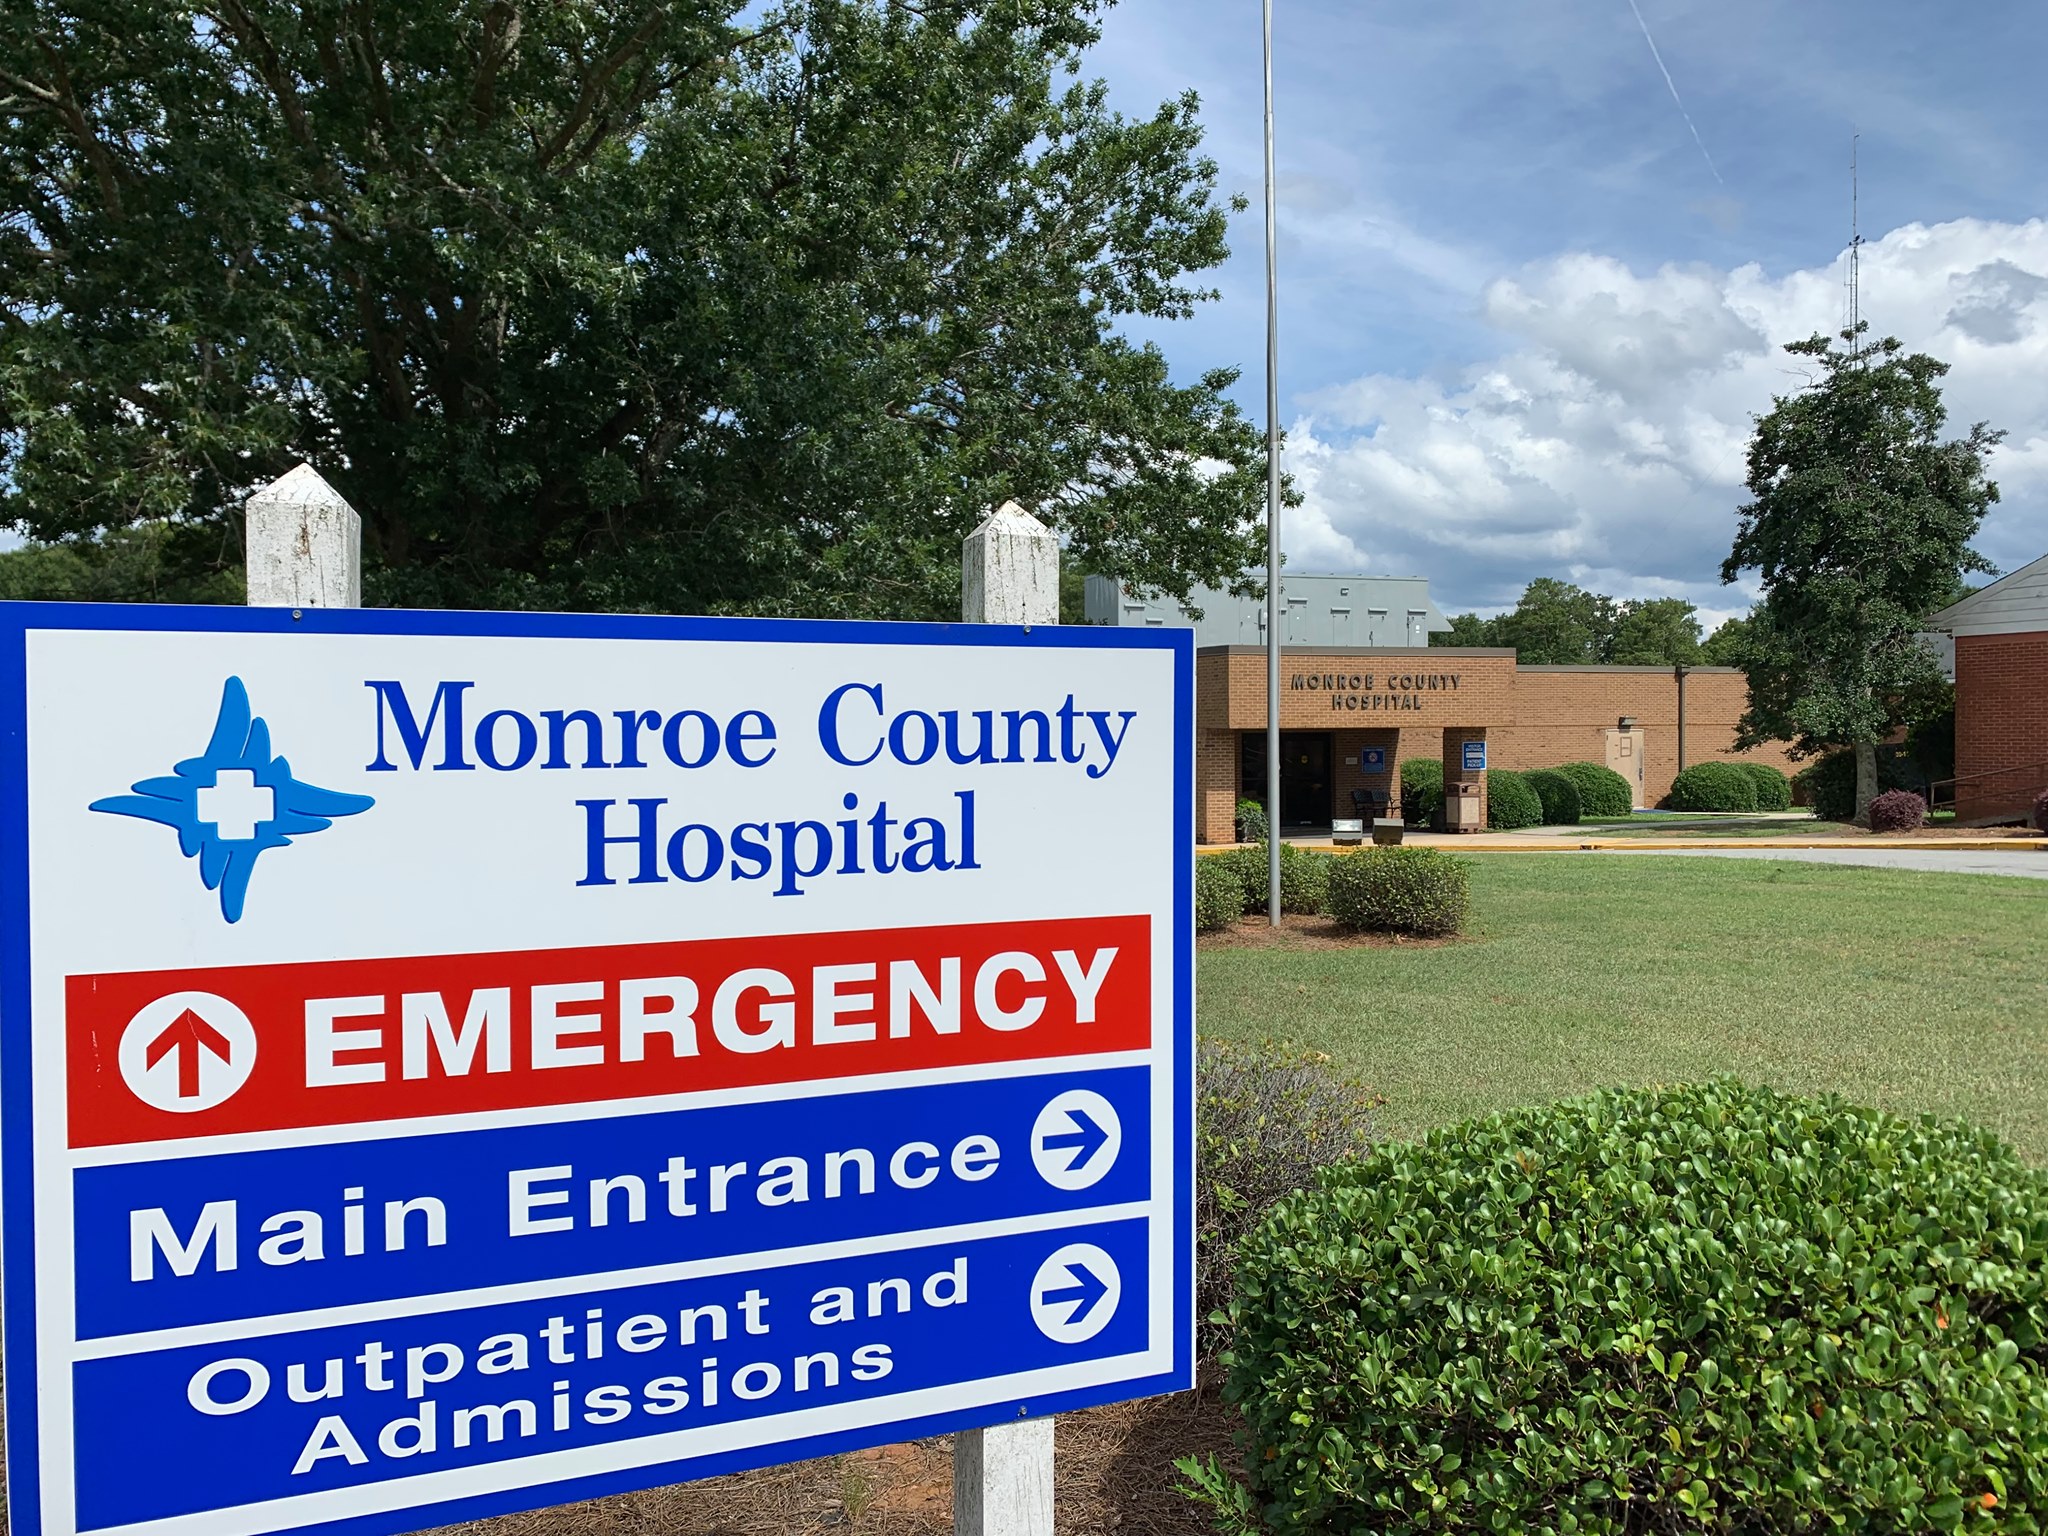 Monroe County Hospital entrance sign with building in the background